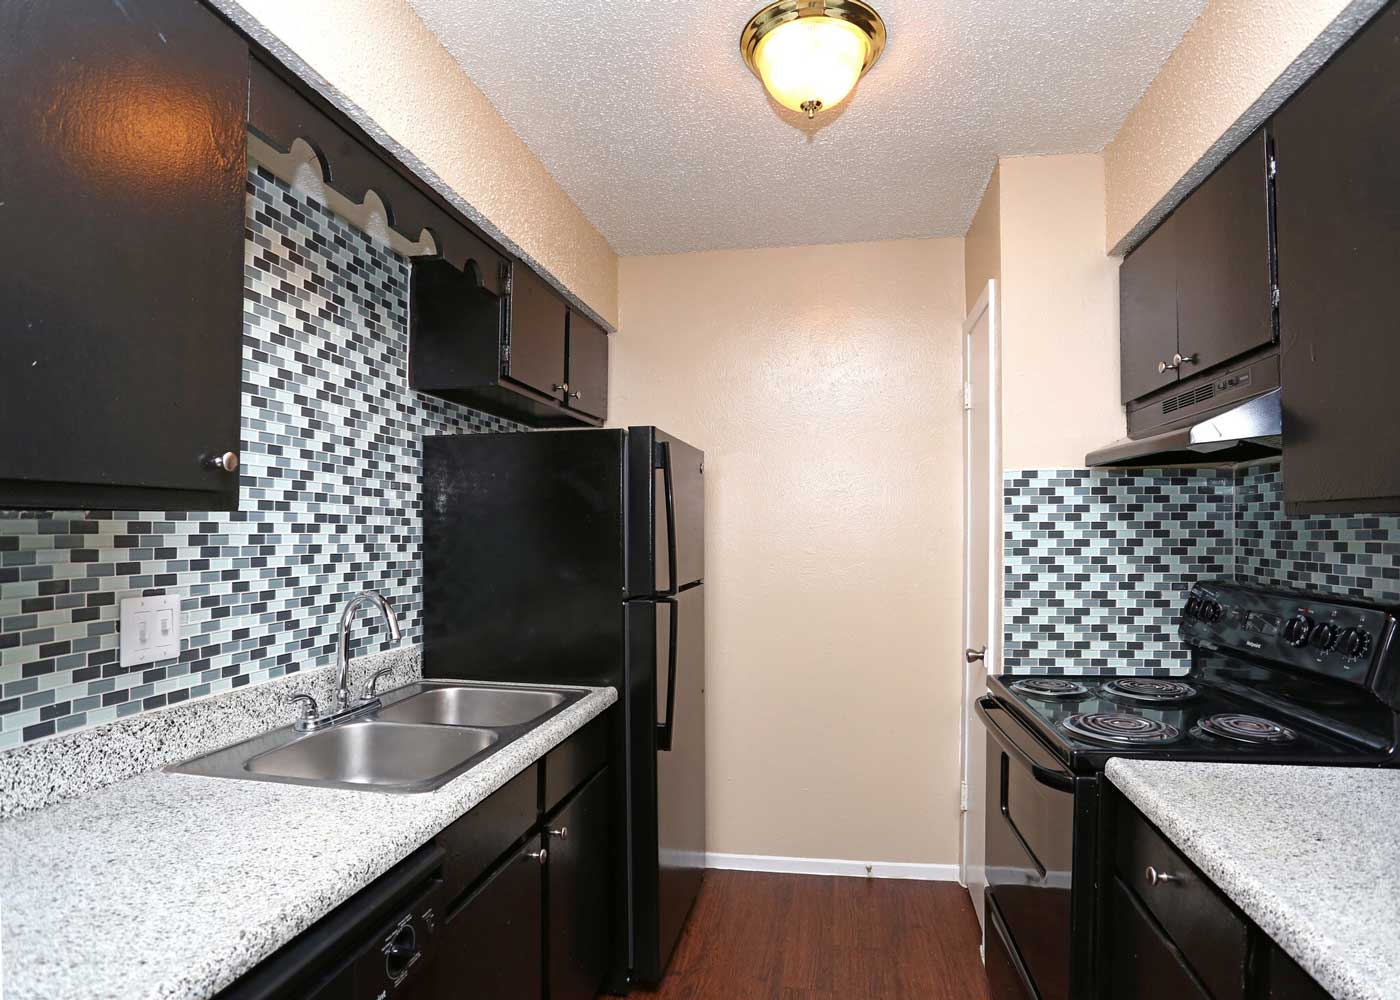 Fully Equipped Kitchen at The Junction Apartments in Arlington, TX